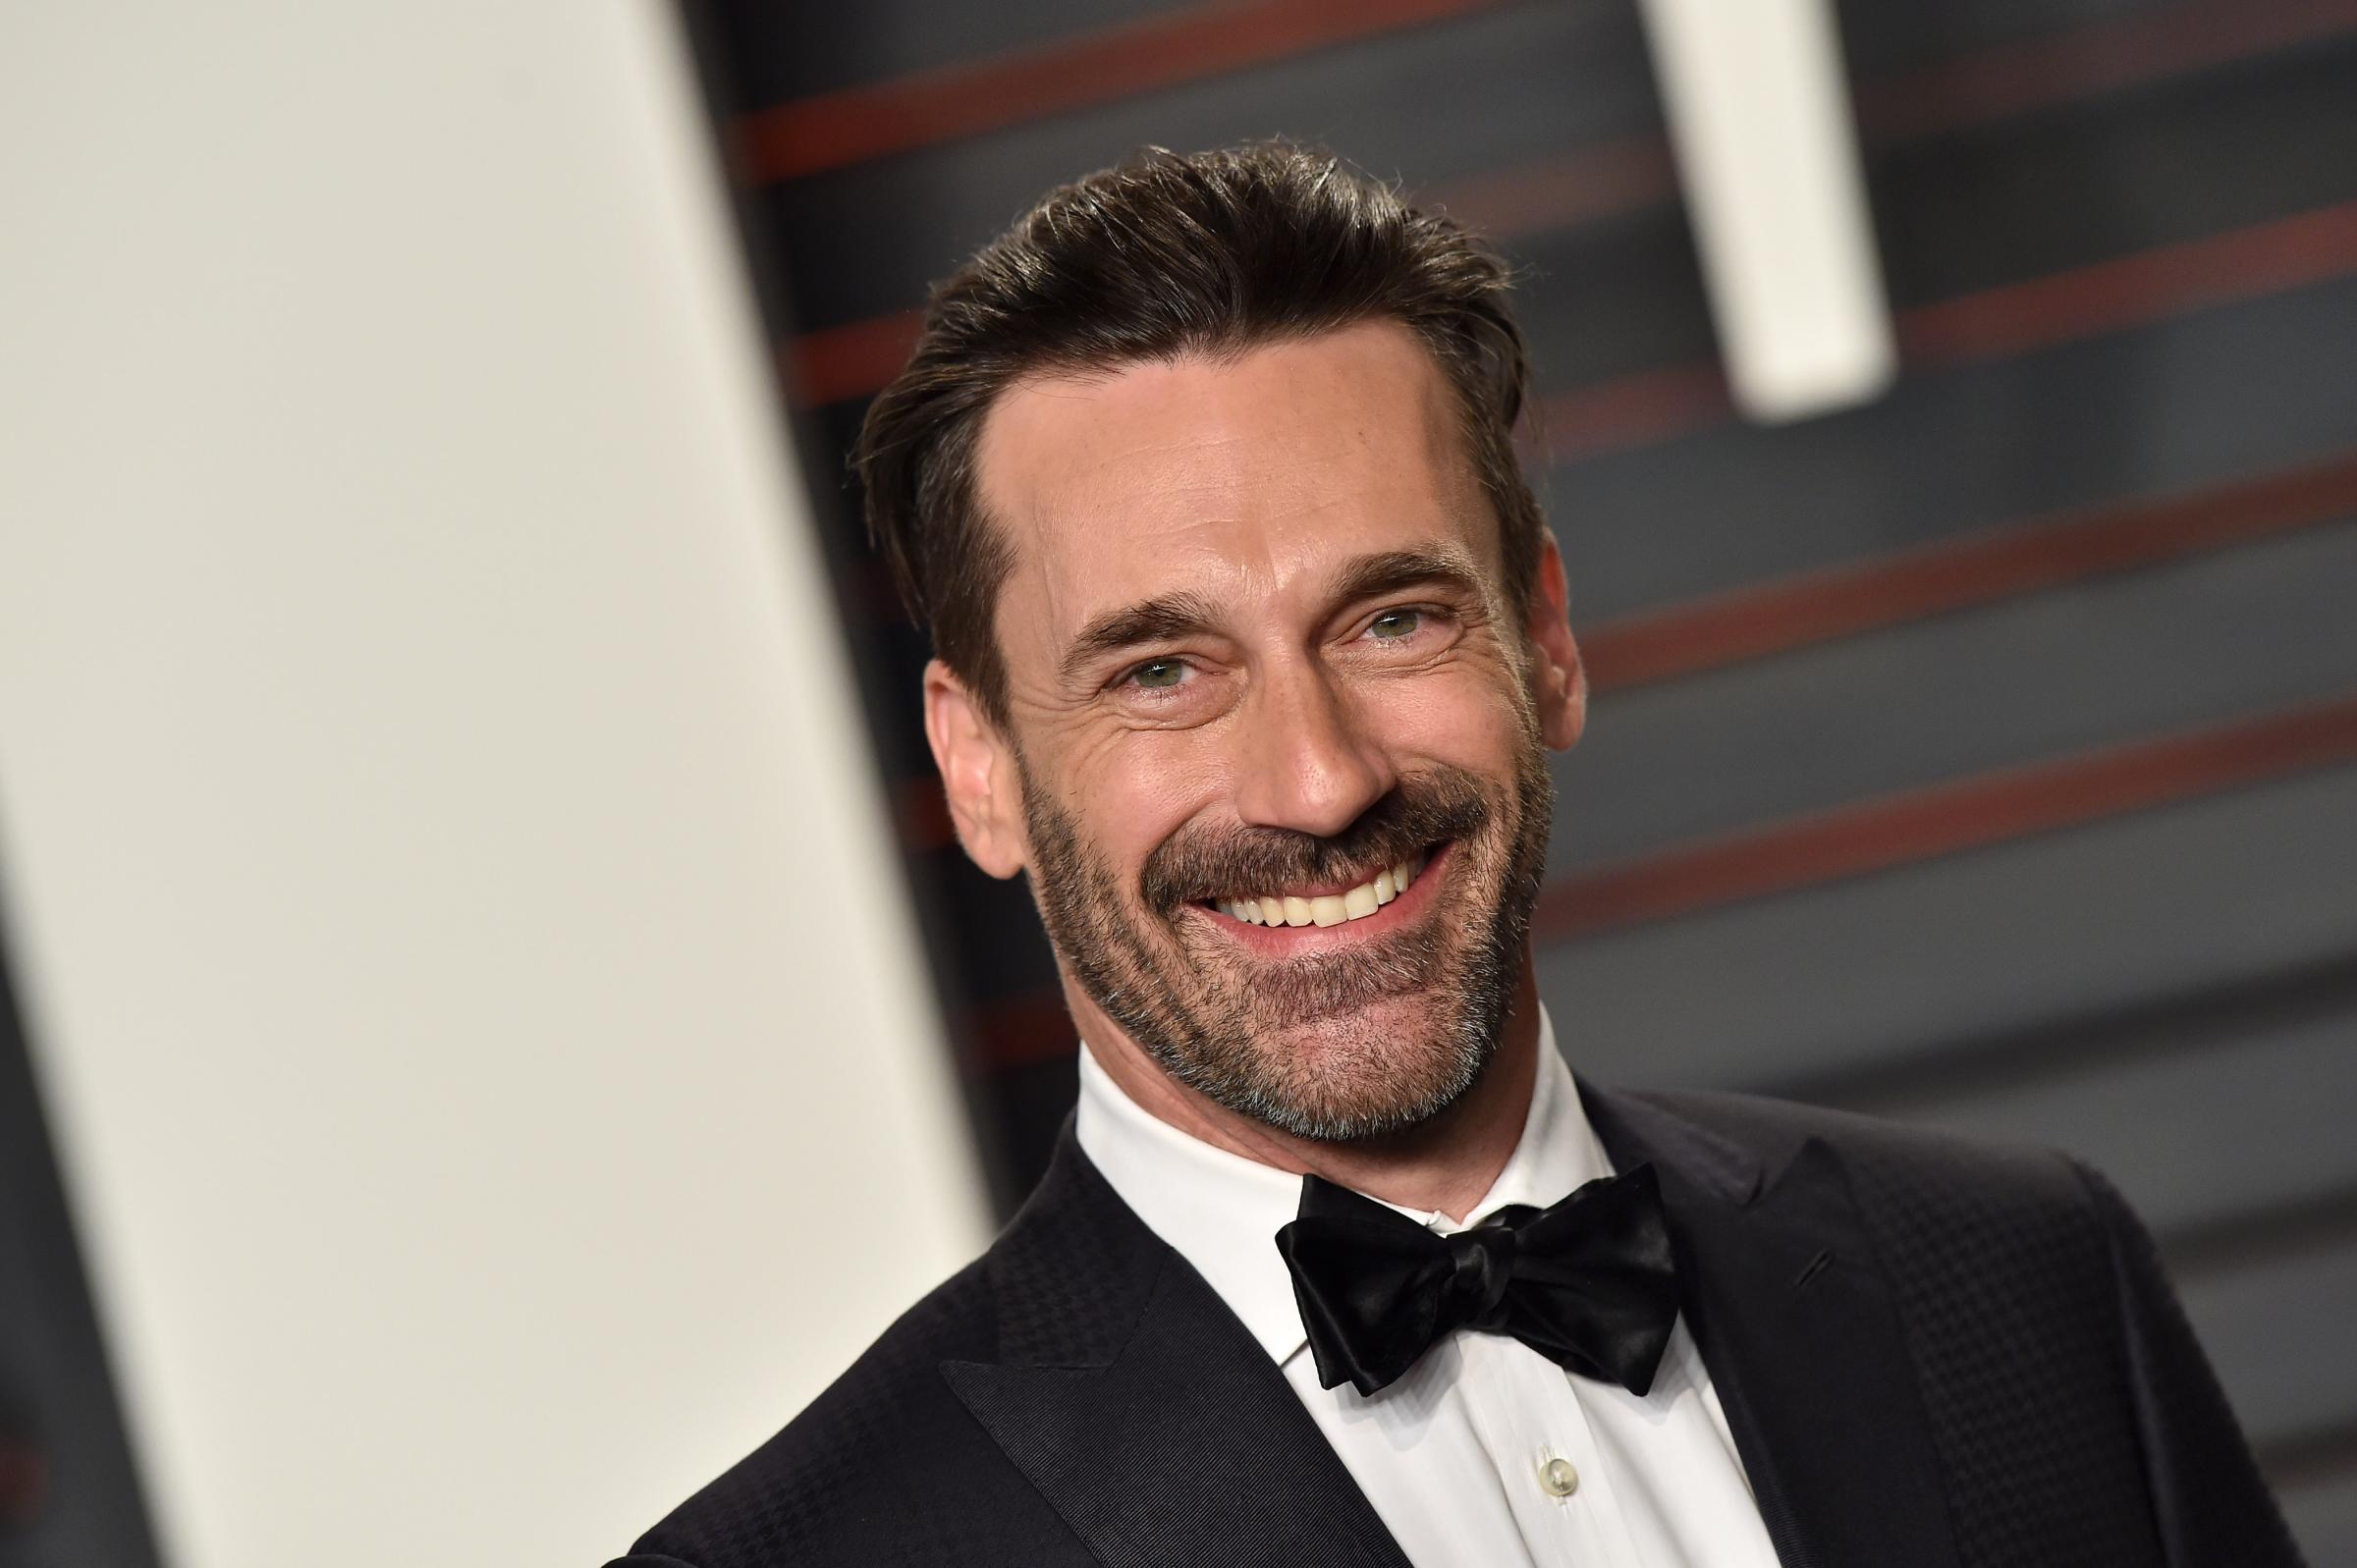 Actor Jon Hamm arrives at the 2016 Vanity Fair Oscar Party Hosted By Graydon Carter at Wallis Annenberg Center for the Performing Arts on February 28, 2016 in Beverly Hills, California.